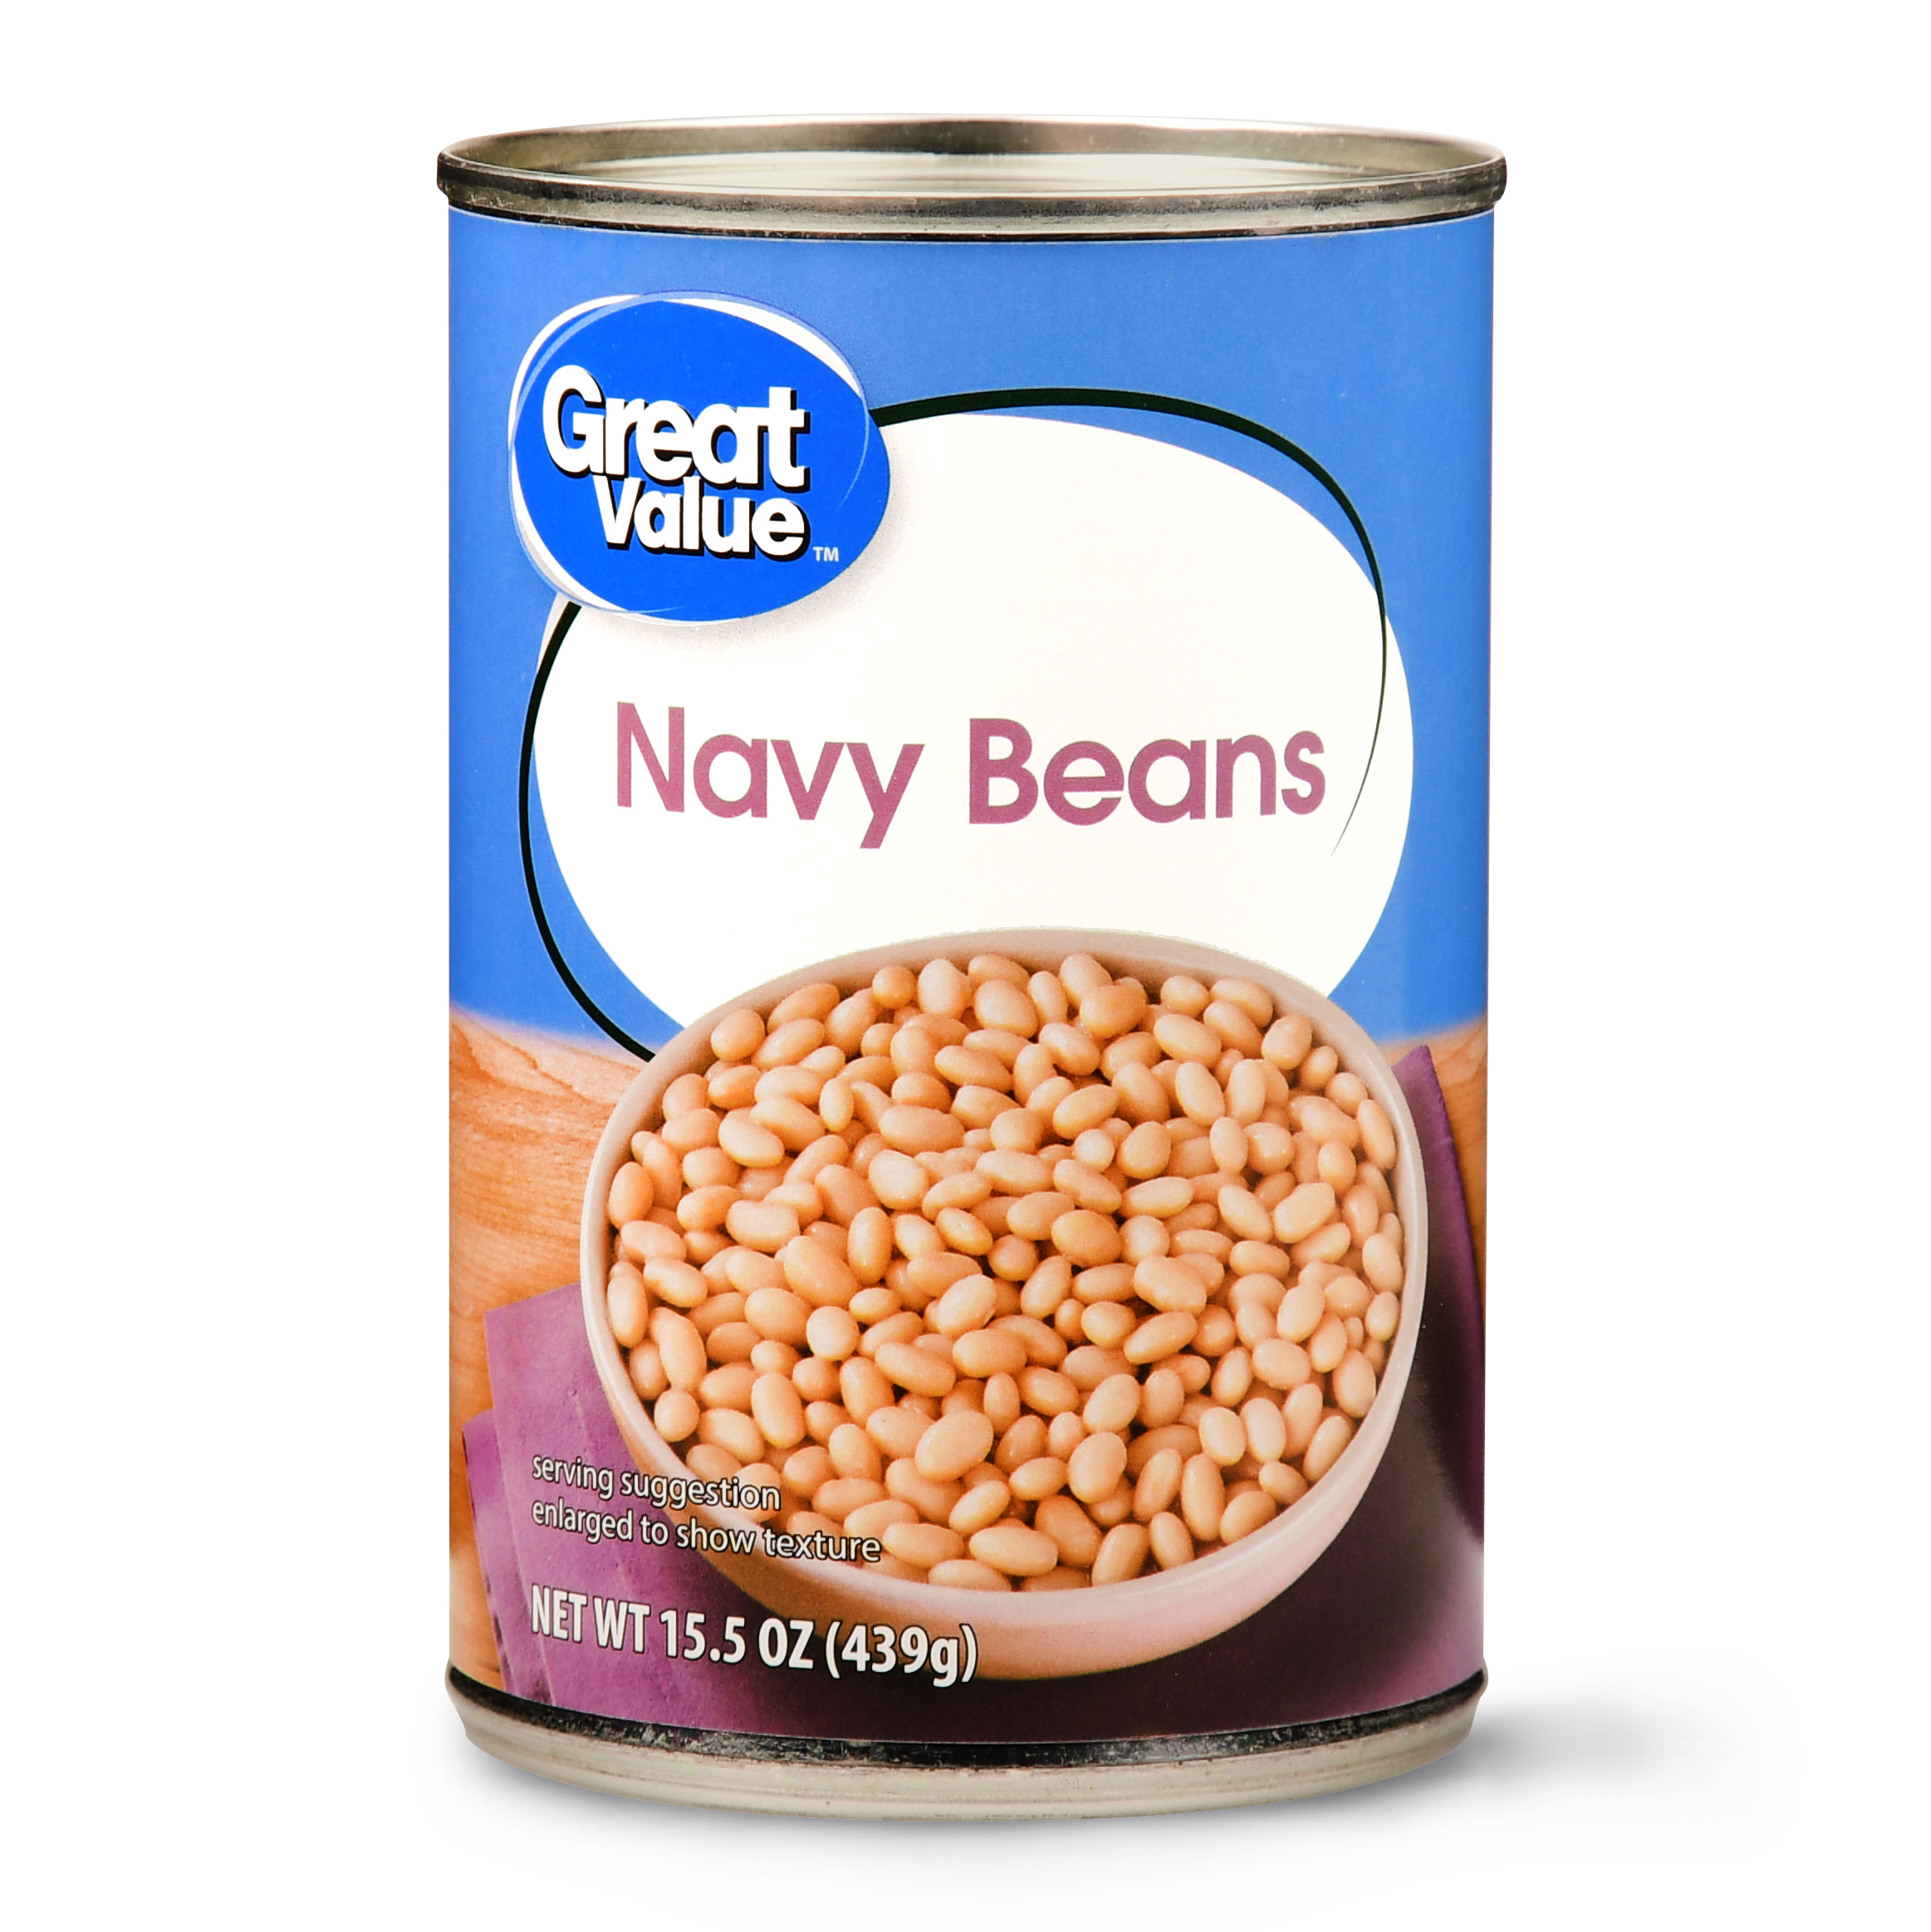 Great Value Navy Beans, 15.5 Oz Image